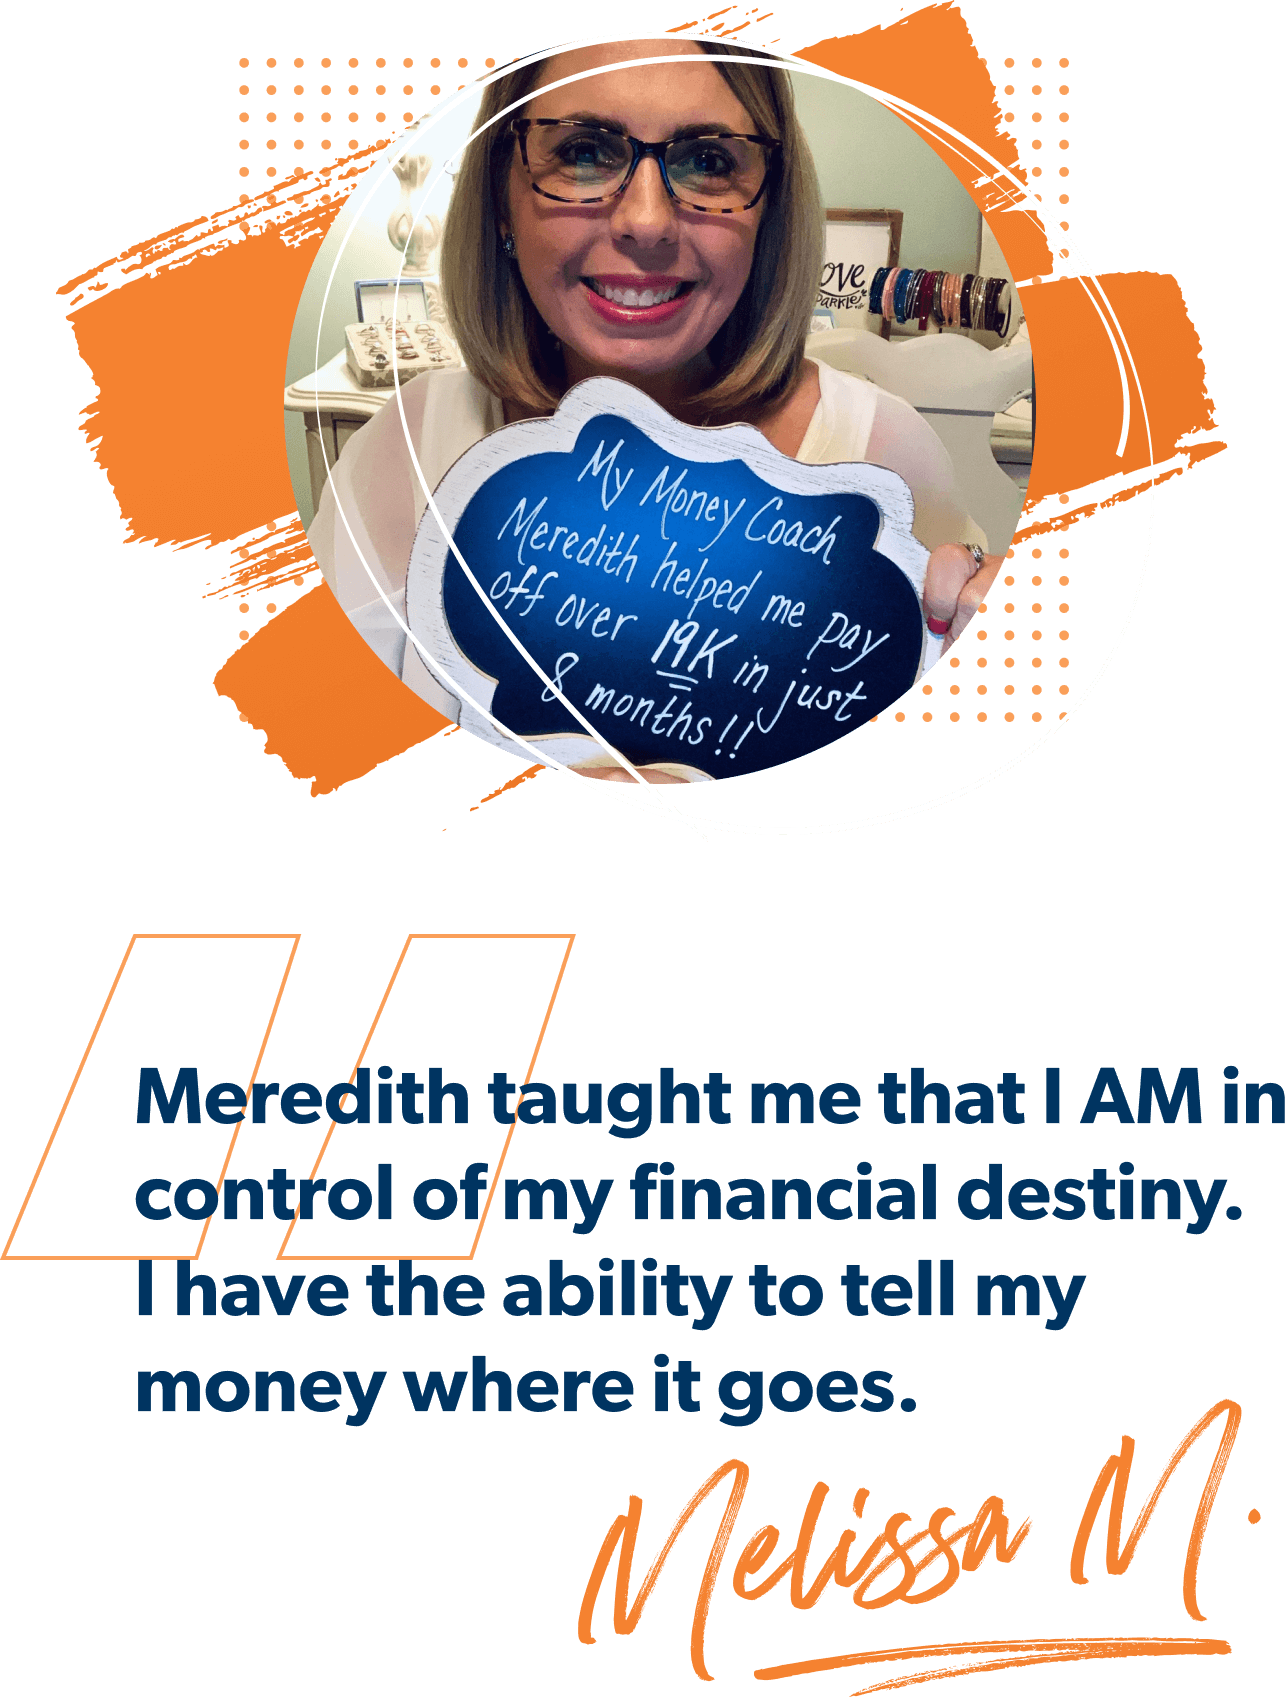 "Meredith taught me that I AM in control of my financial destiny. I have the ability to tell my money where it goes." Melissa M. 